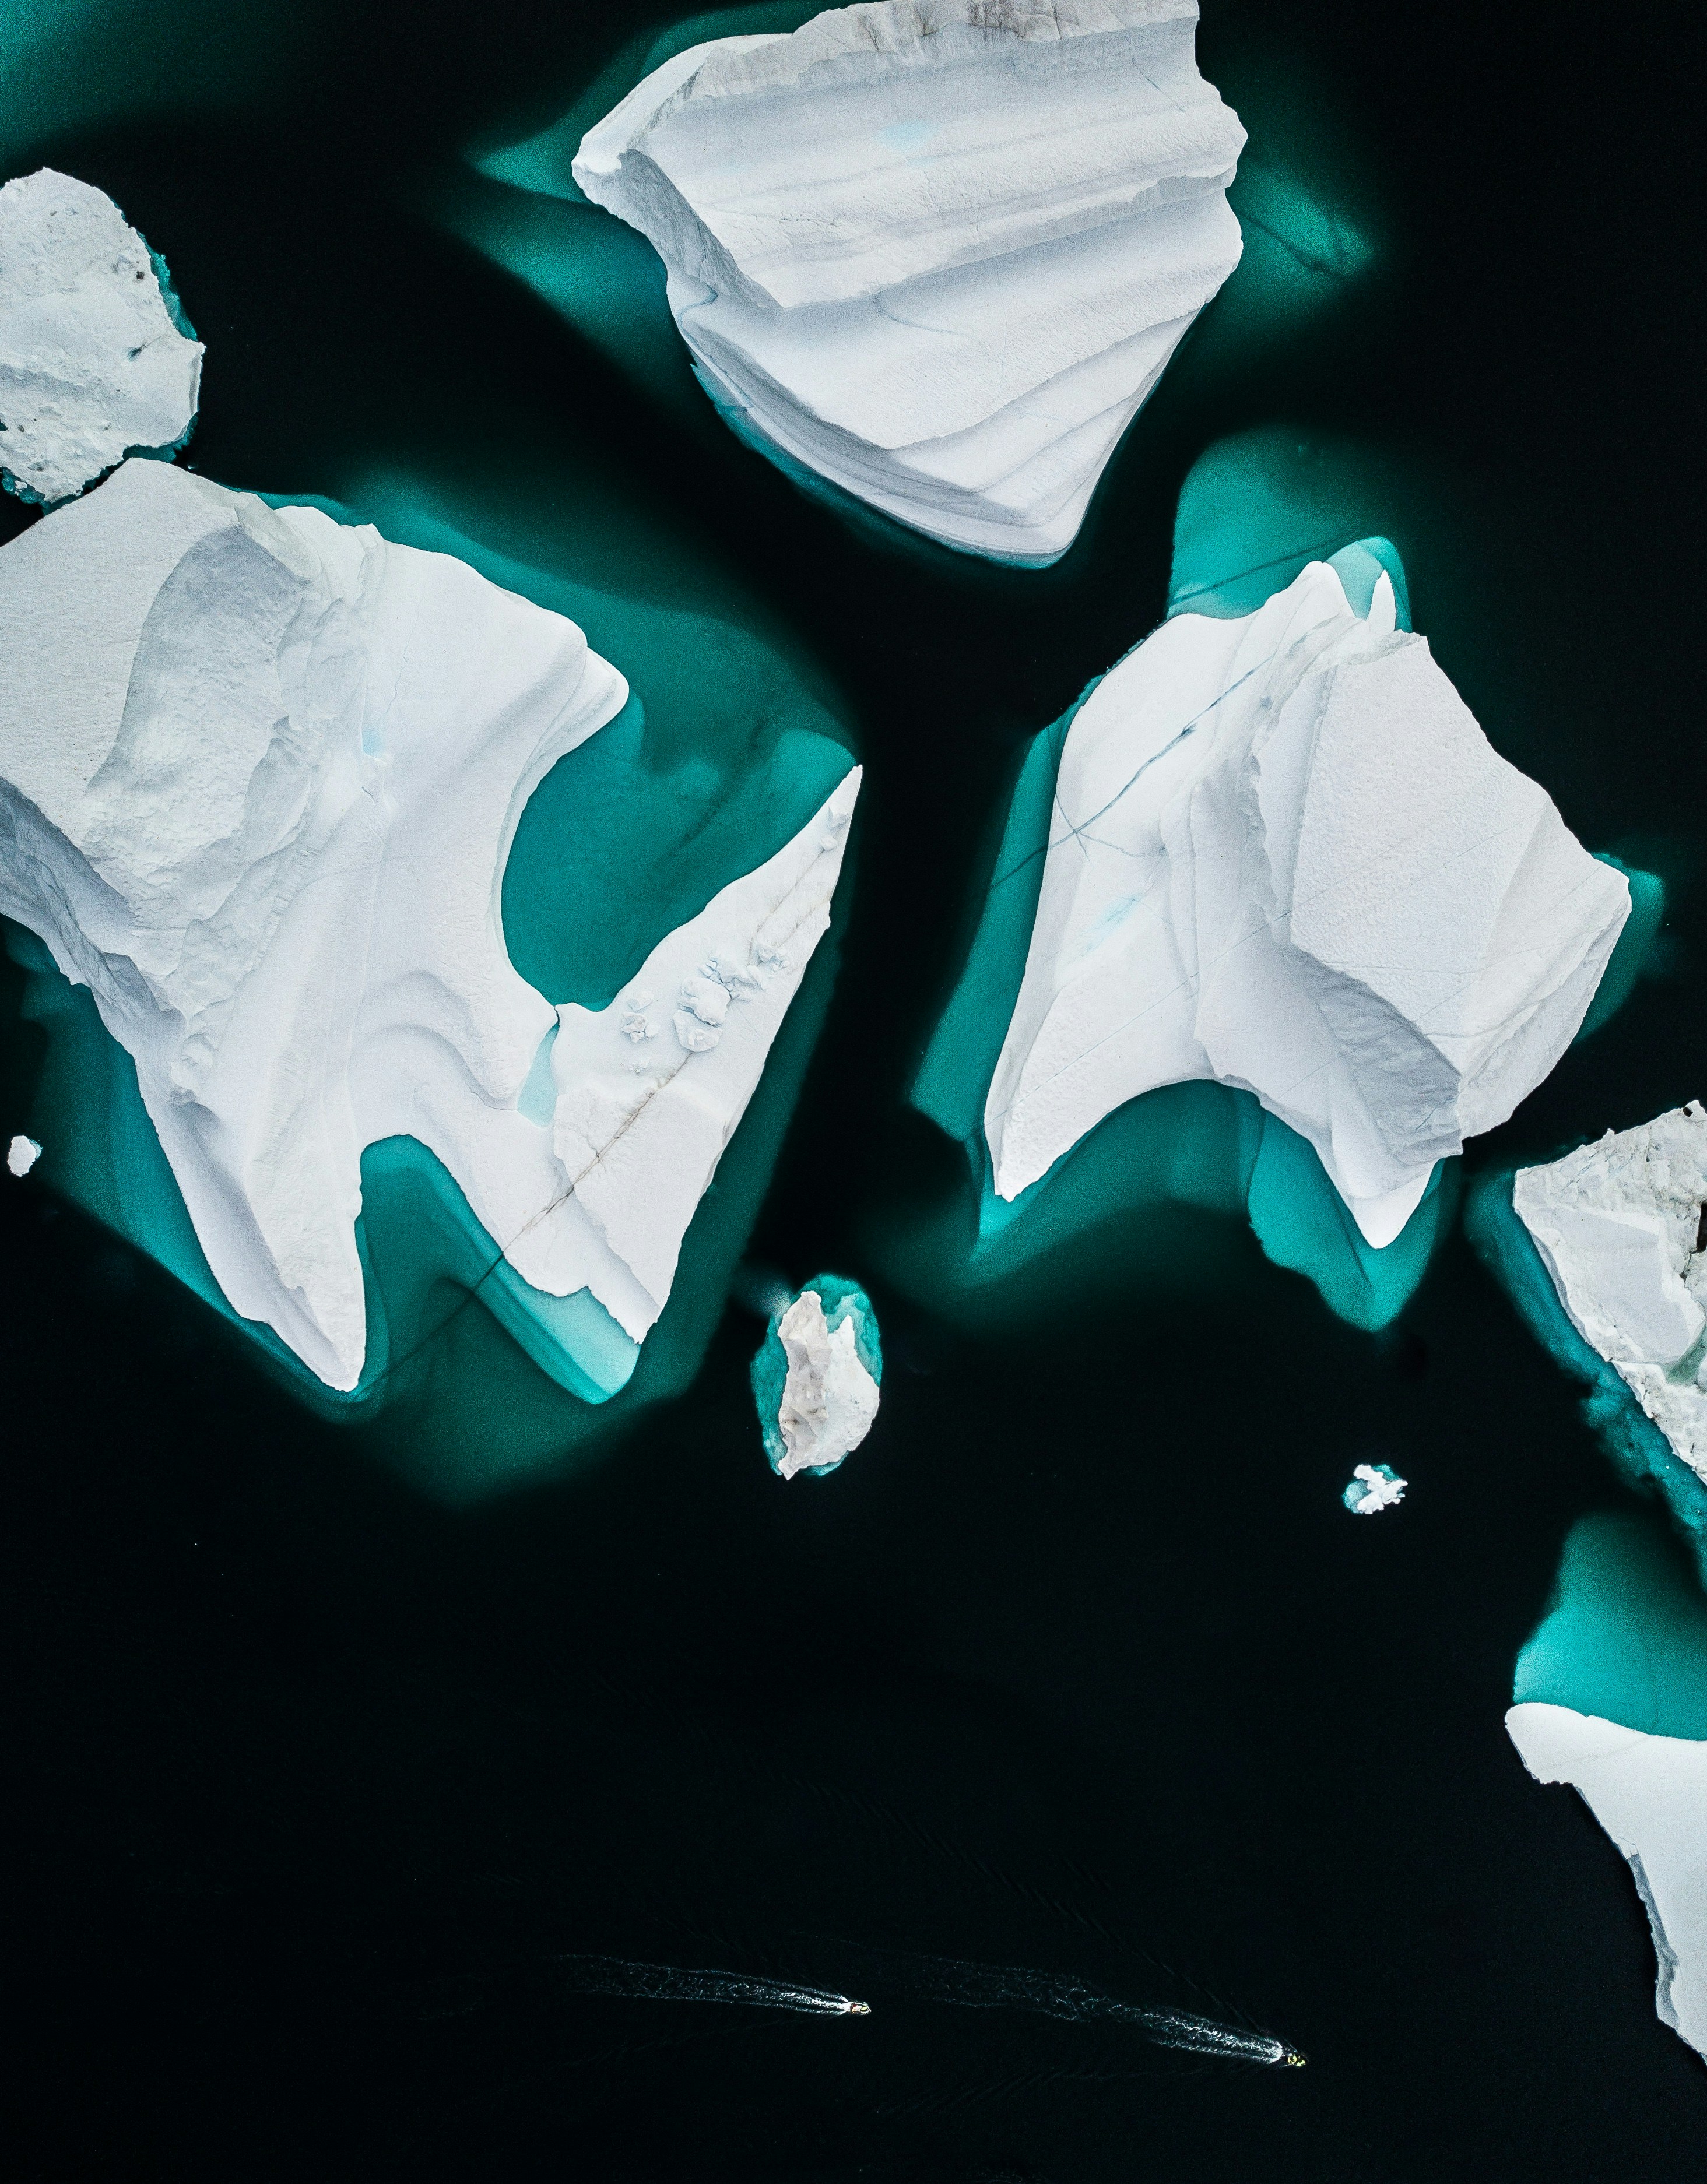 Iceberg at Scoresby Sund, Greenland from above